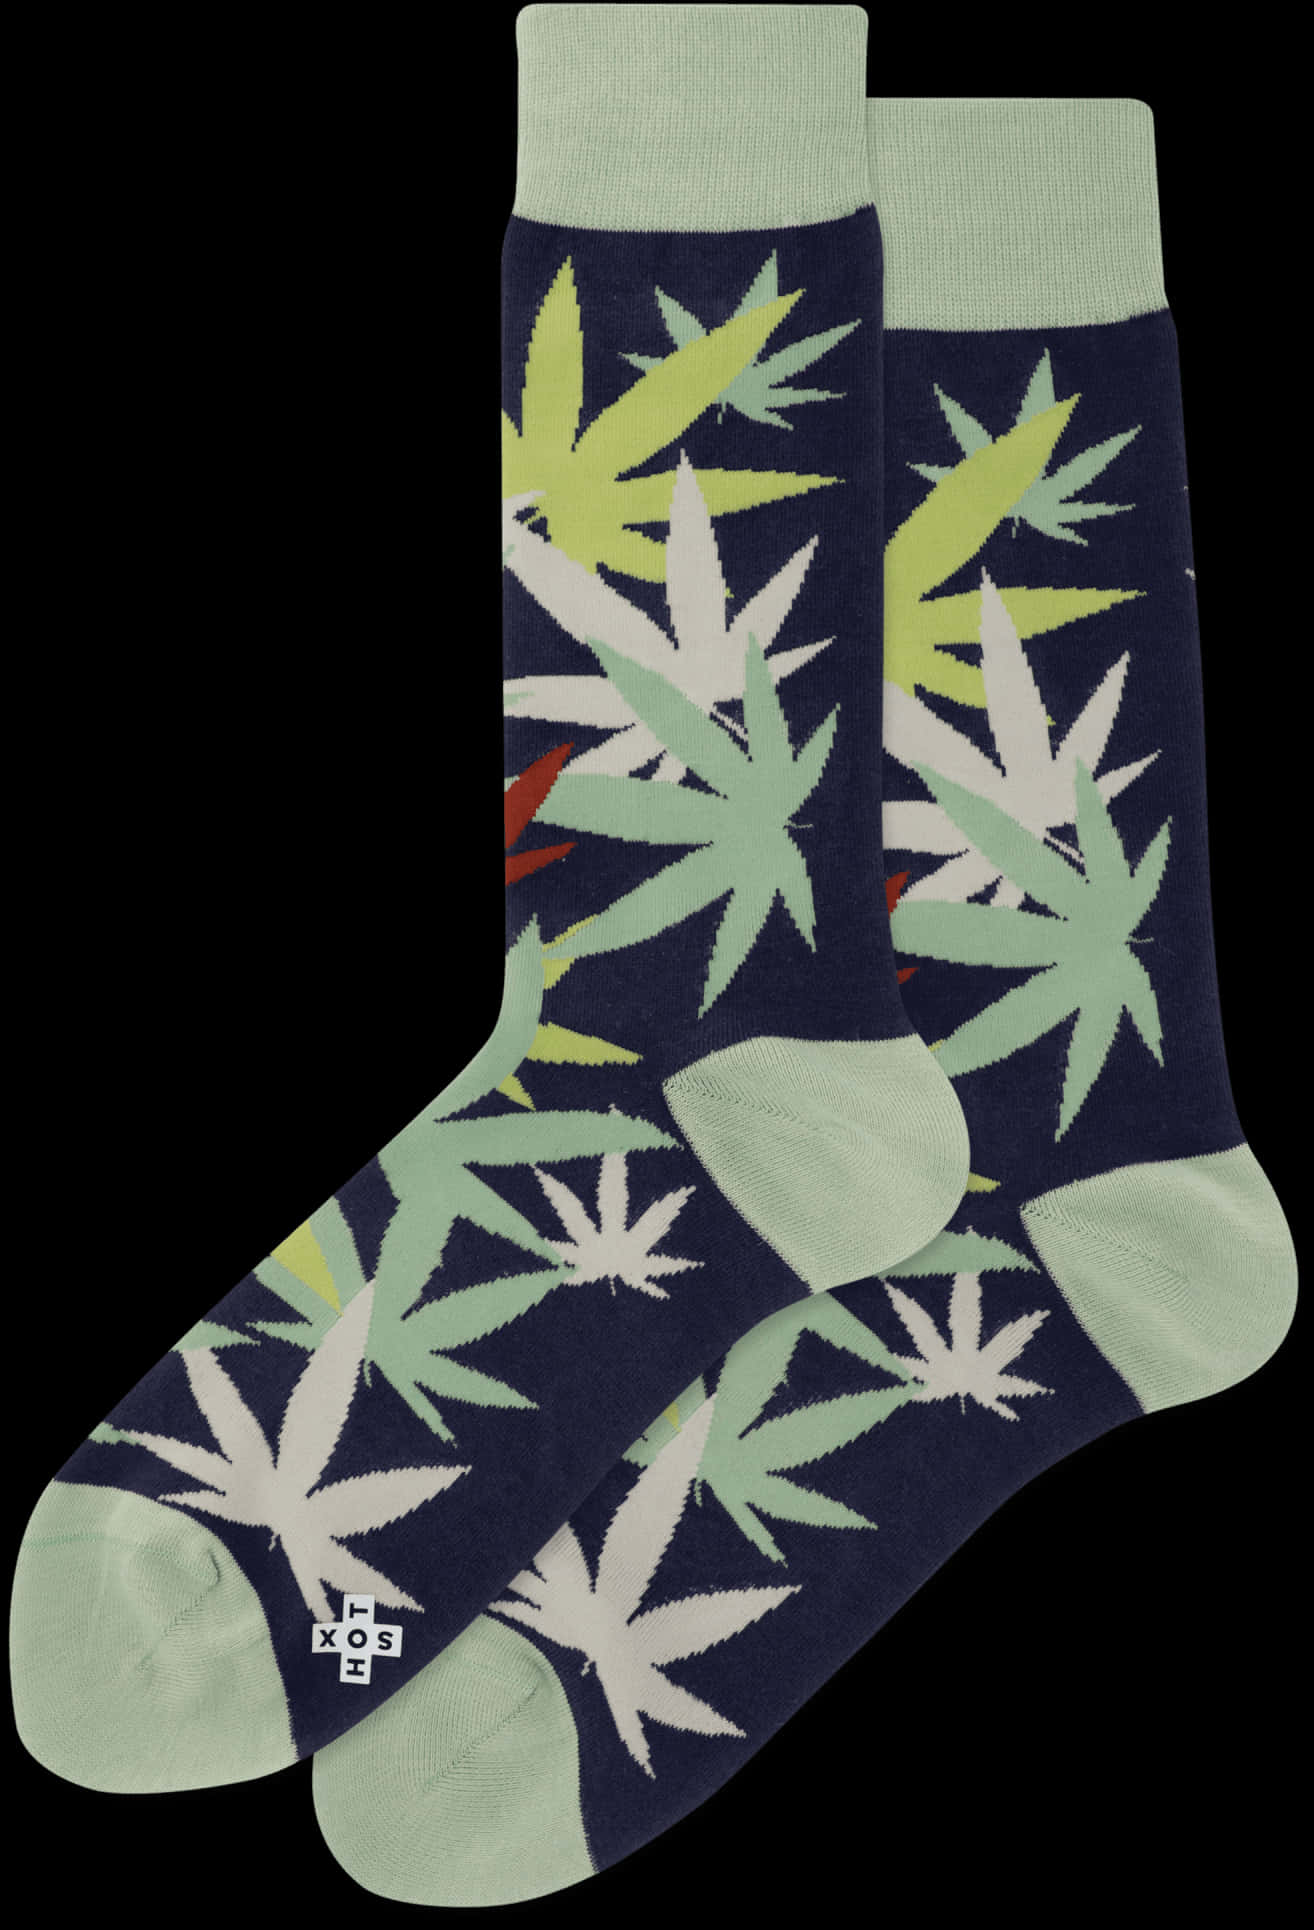 A Pair Of Socks With Leaves On Them